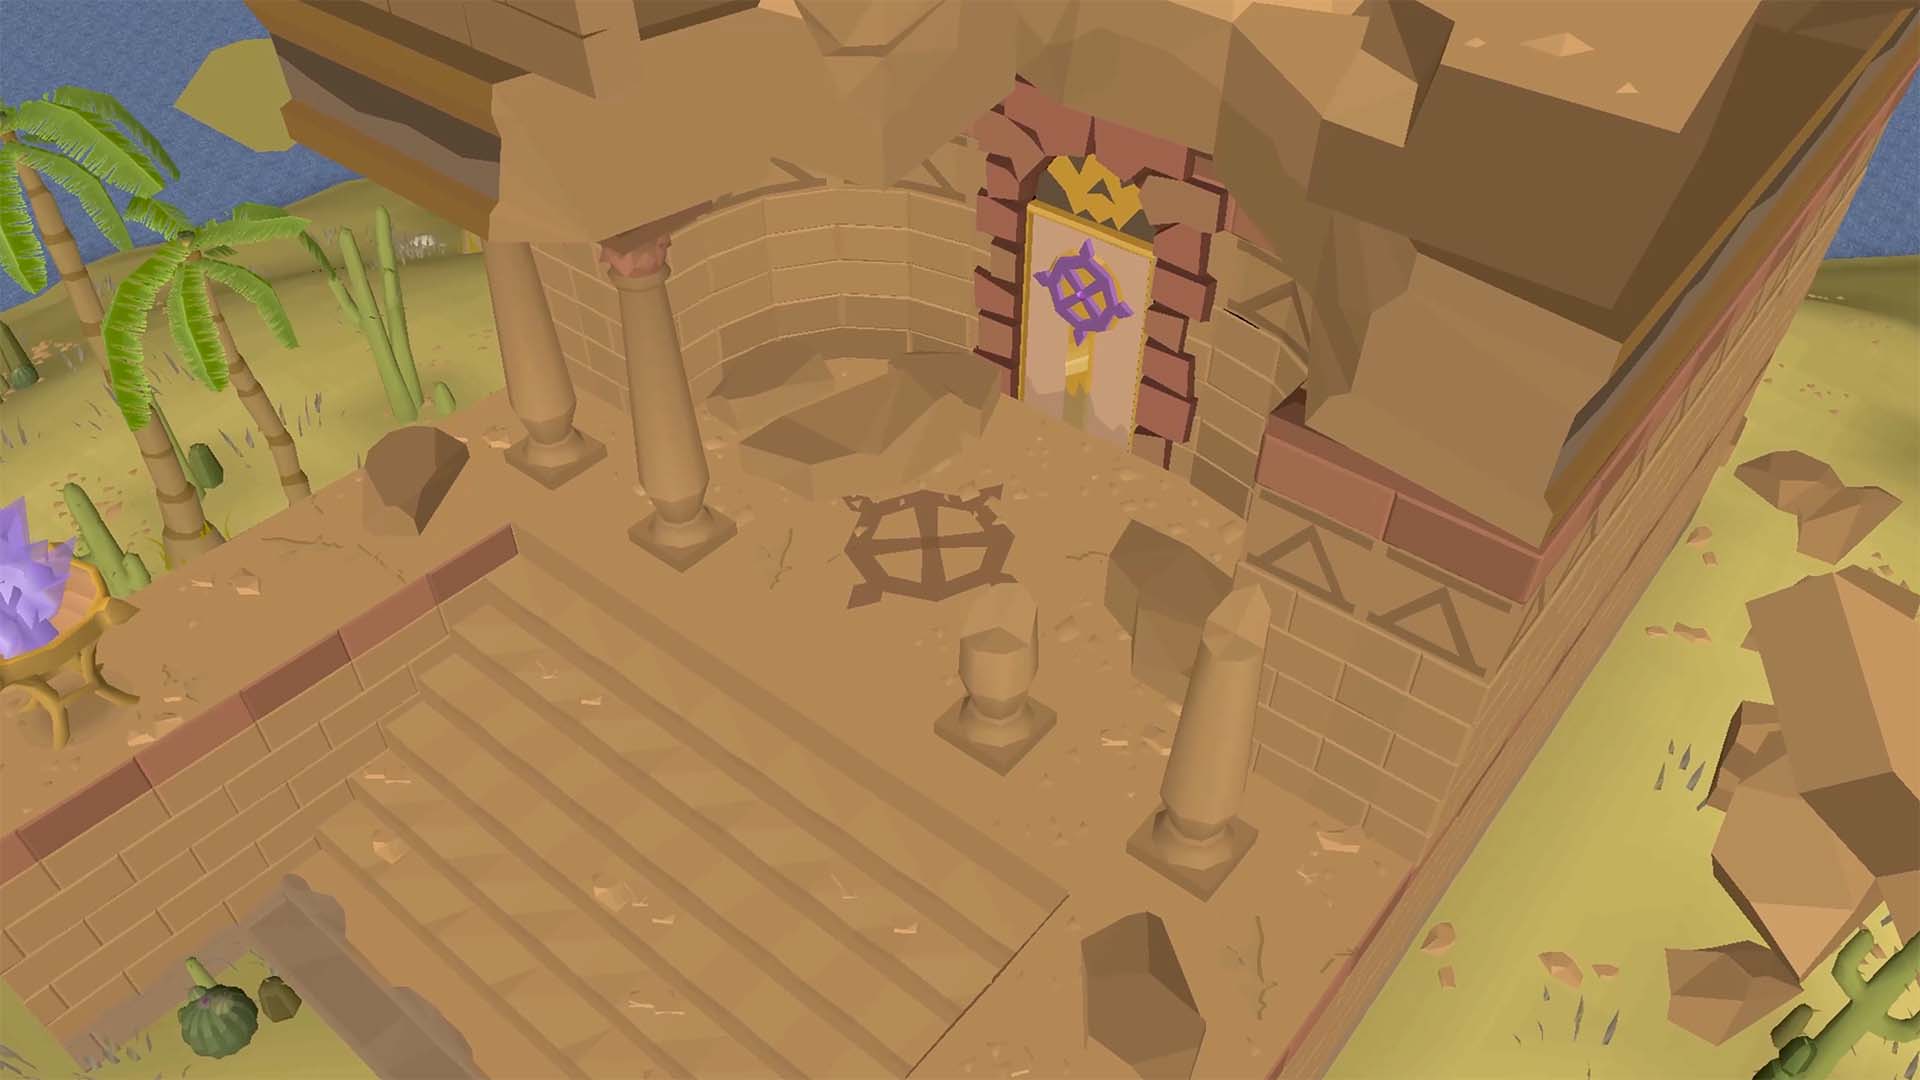 Old School RuneScape on X: ⚙️ GAME UPDATE ⚙️ 🏝️ This week, we're going  back to the Desert with more improvements to Desert Treasure II and its  bosses. Summer is truly in